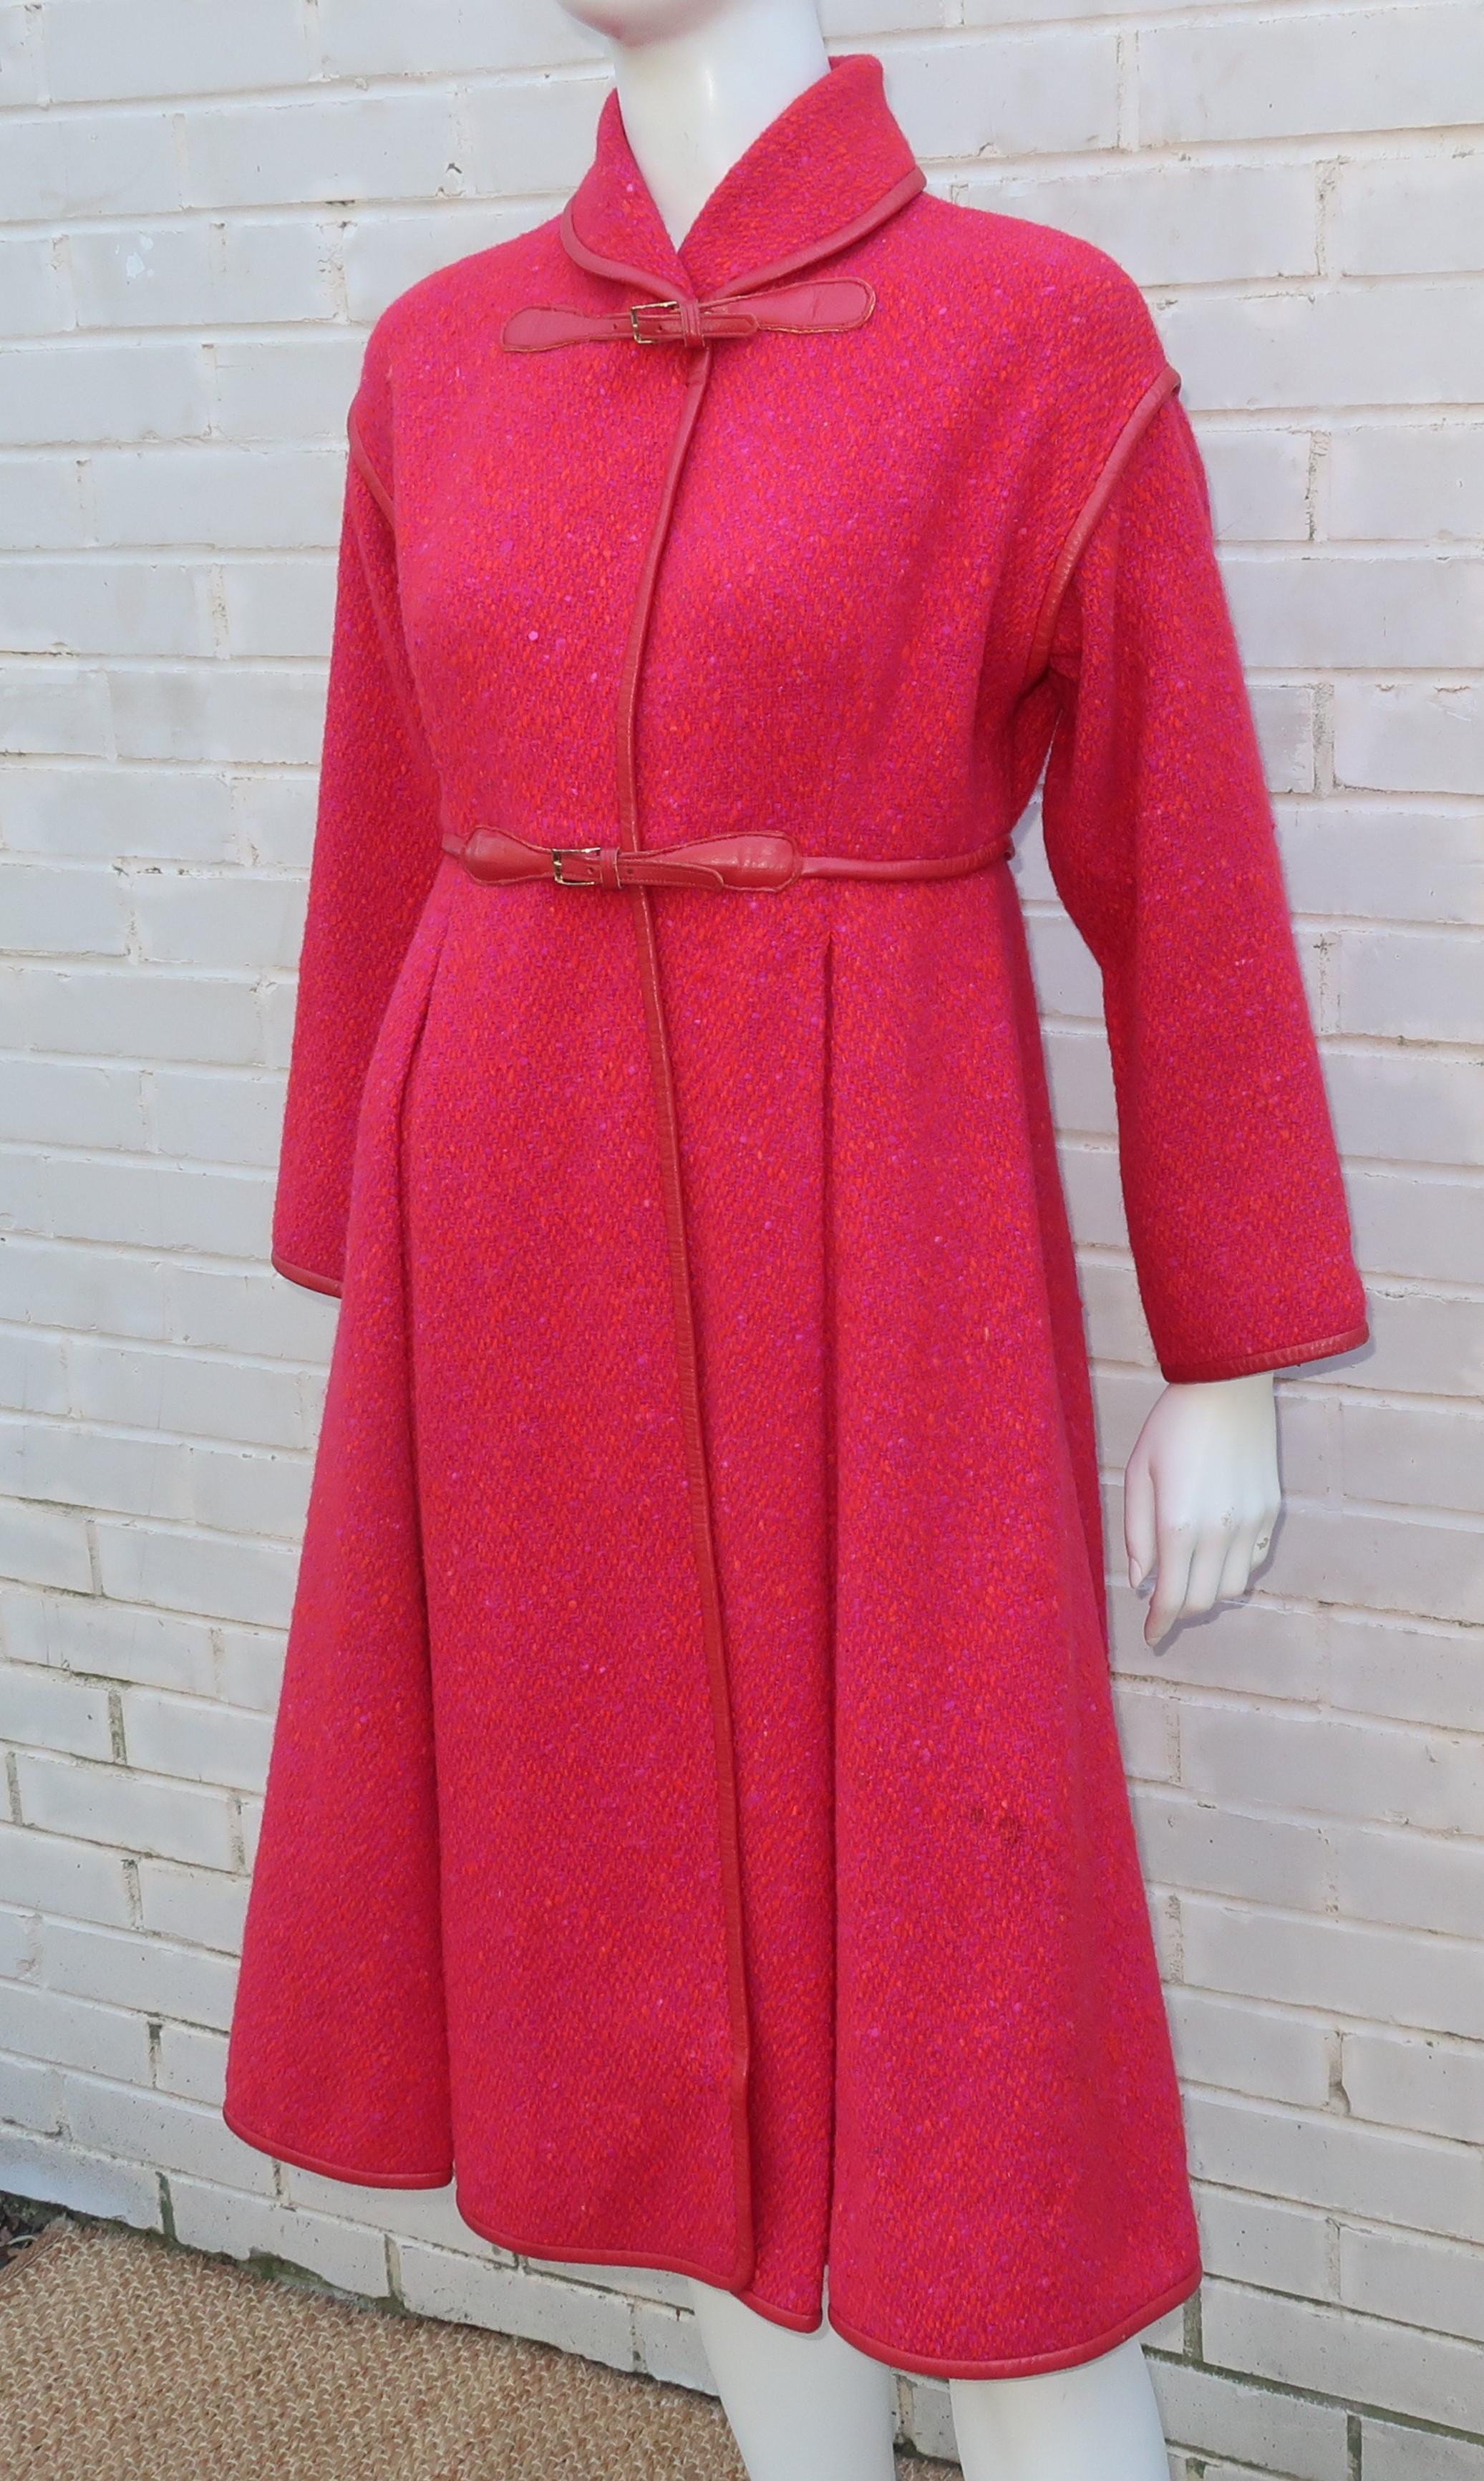 Bonnie Cashin Red & Purple Tweed Coat With Leather Trim, 1960's 1